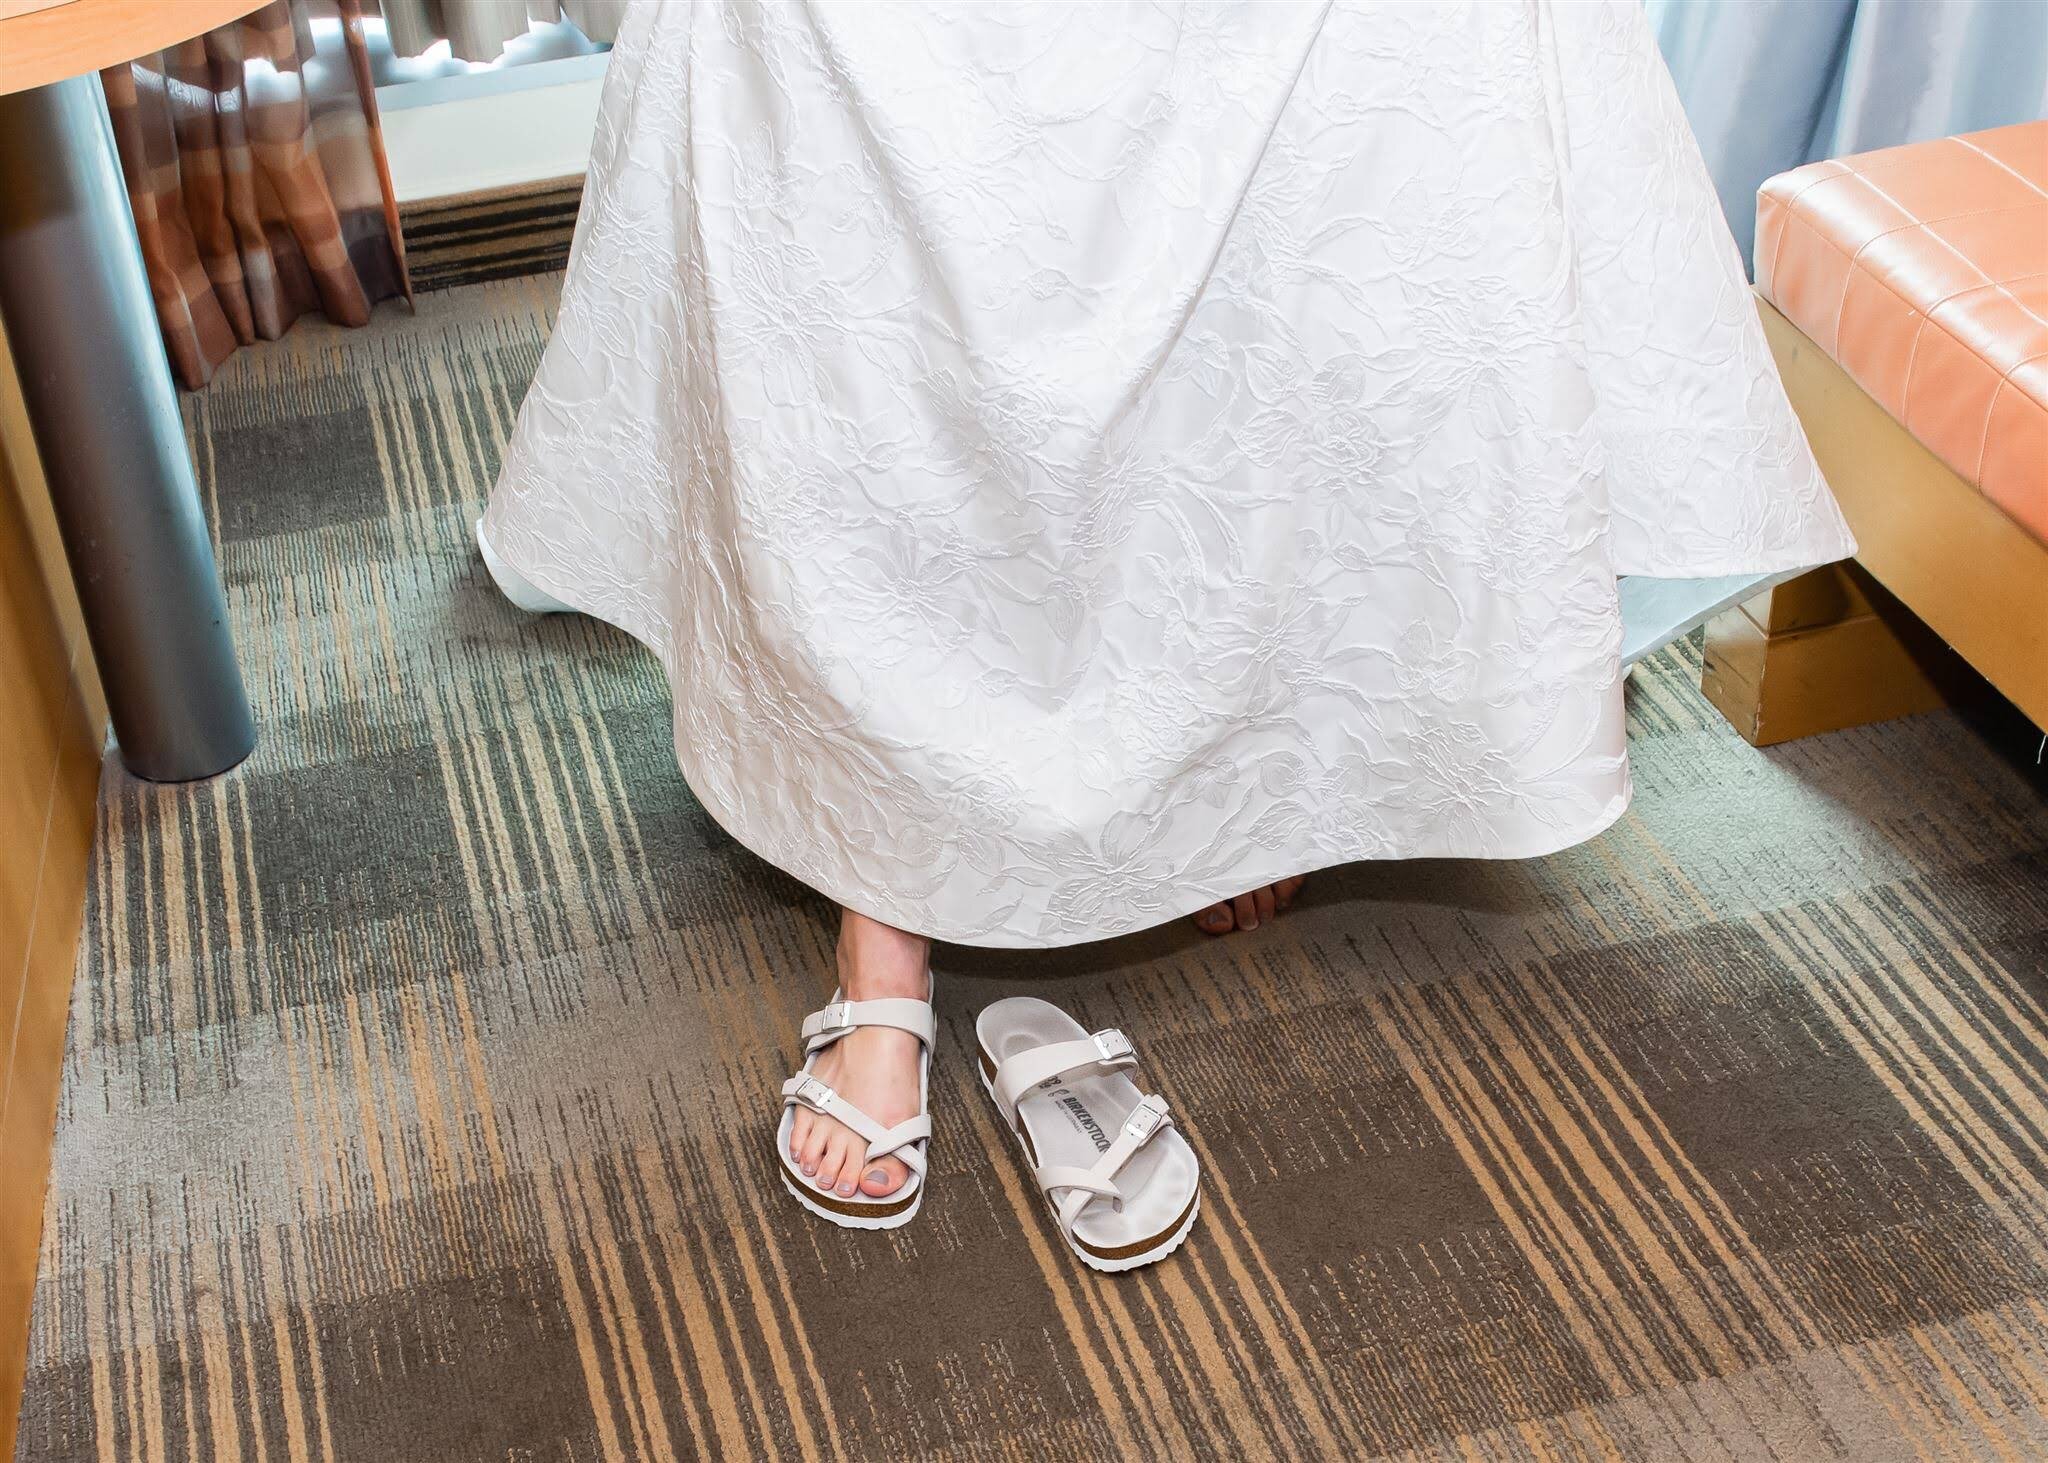 Julie kept her feet cool, stylish and comfy all day in her white Birkenstock sandals.